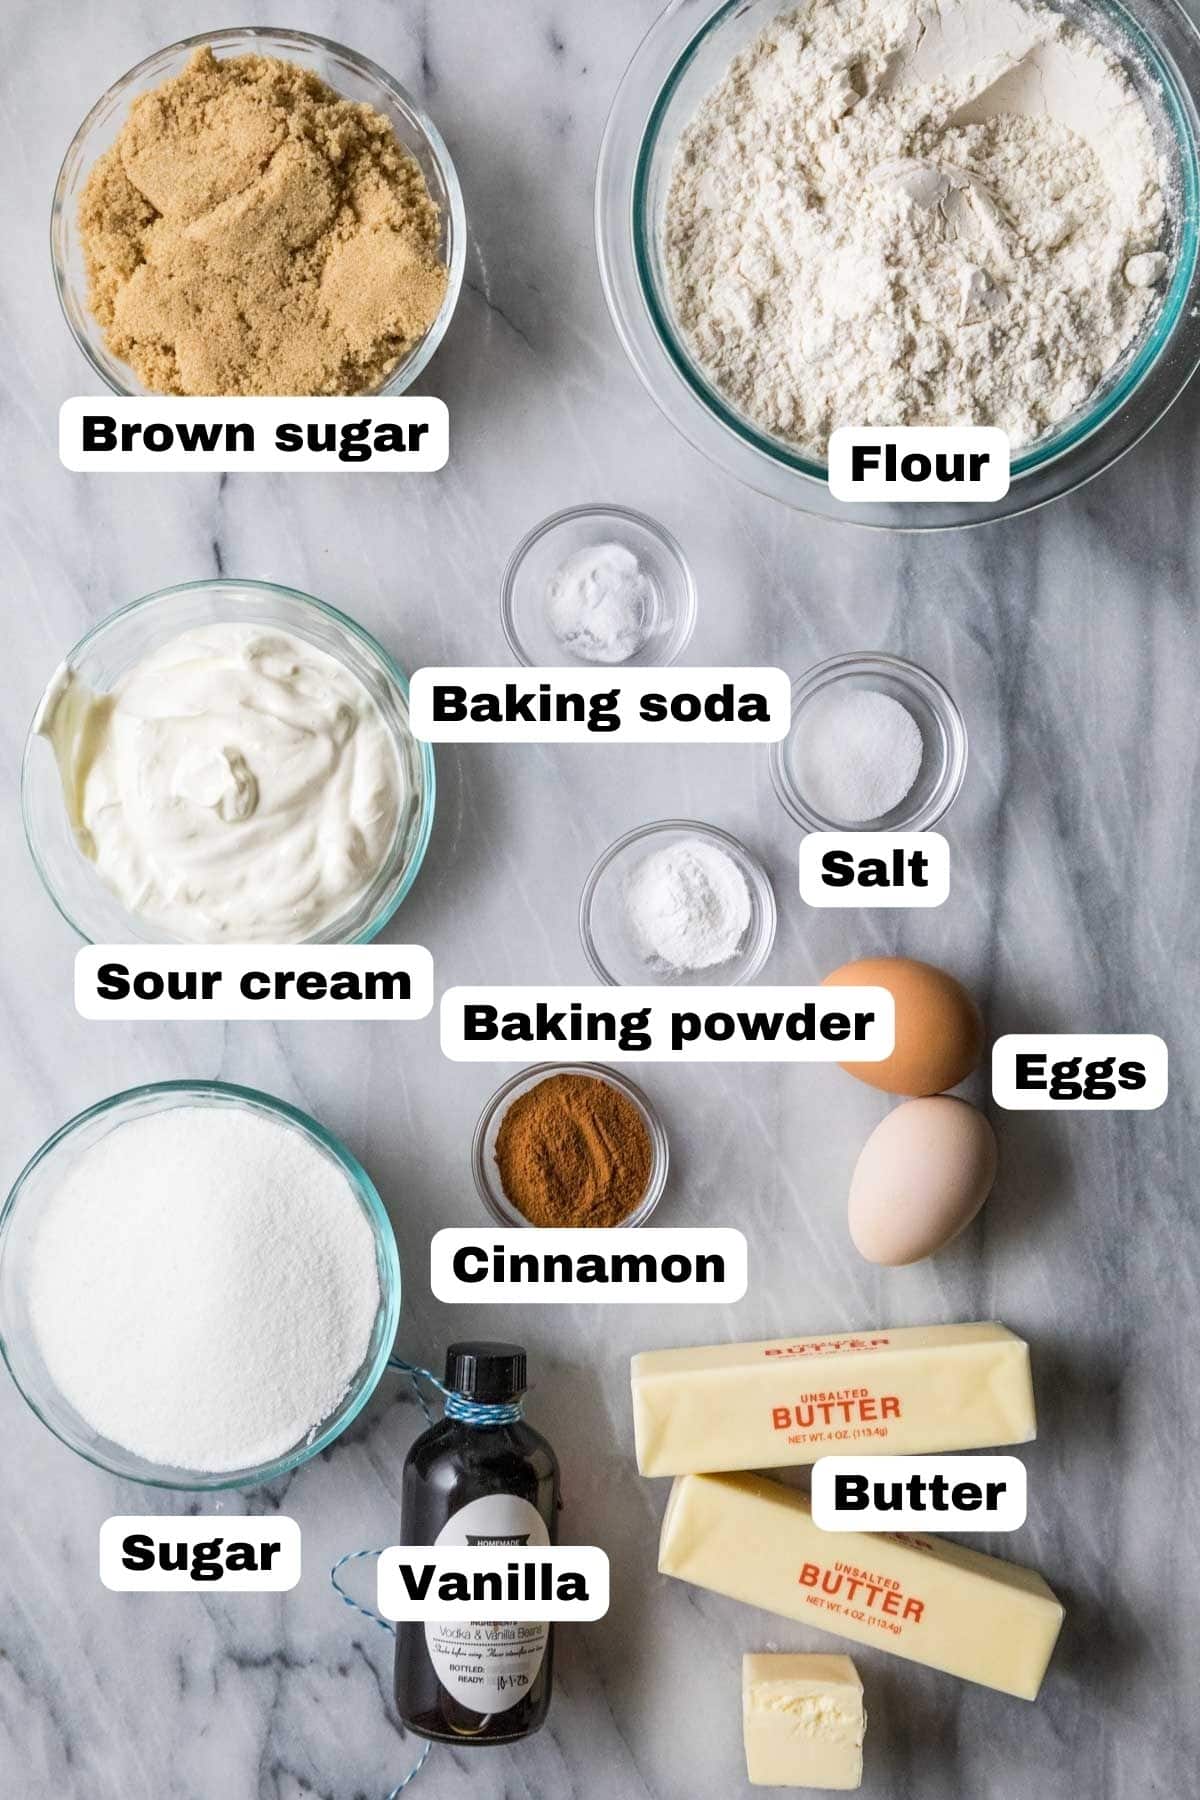 Overhead view of labelled ingredients including brown sugar, cinnamon, sour cream, and more.